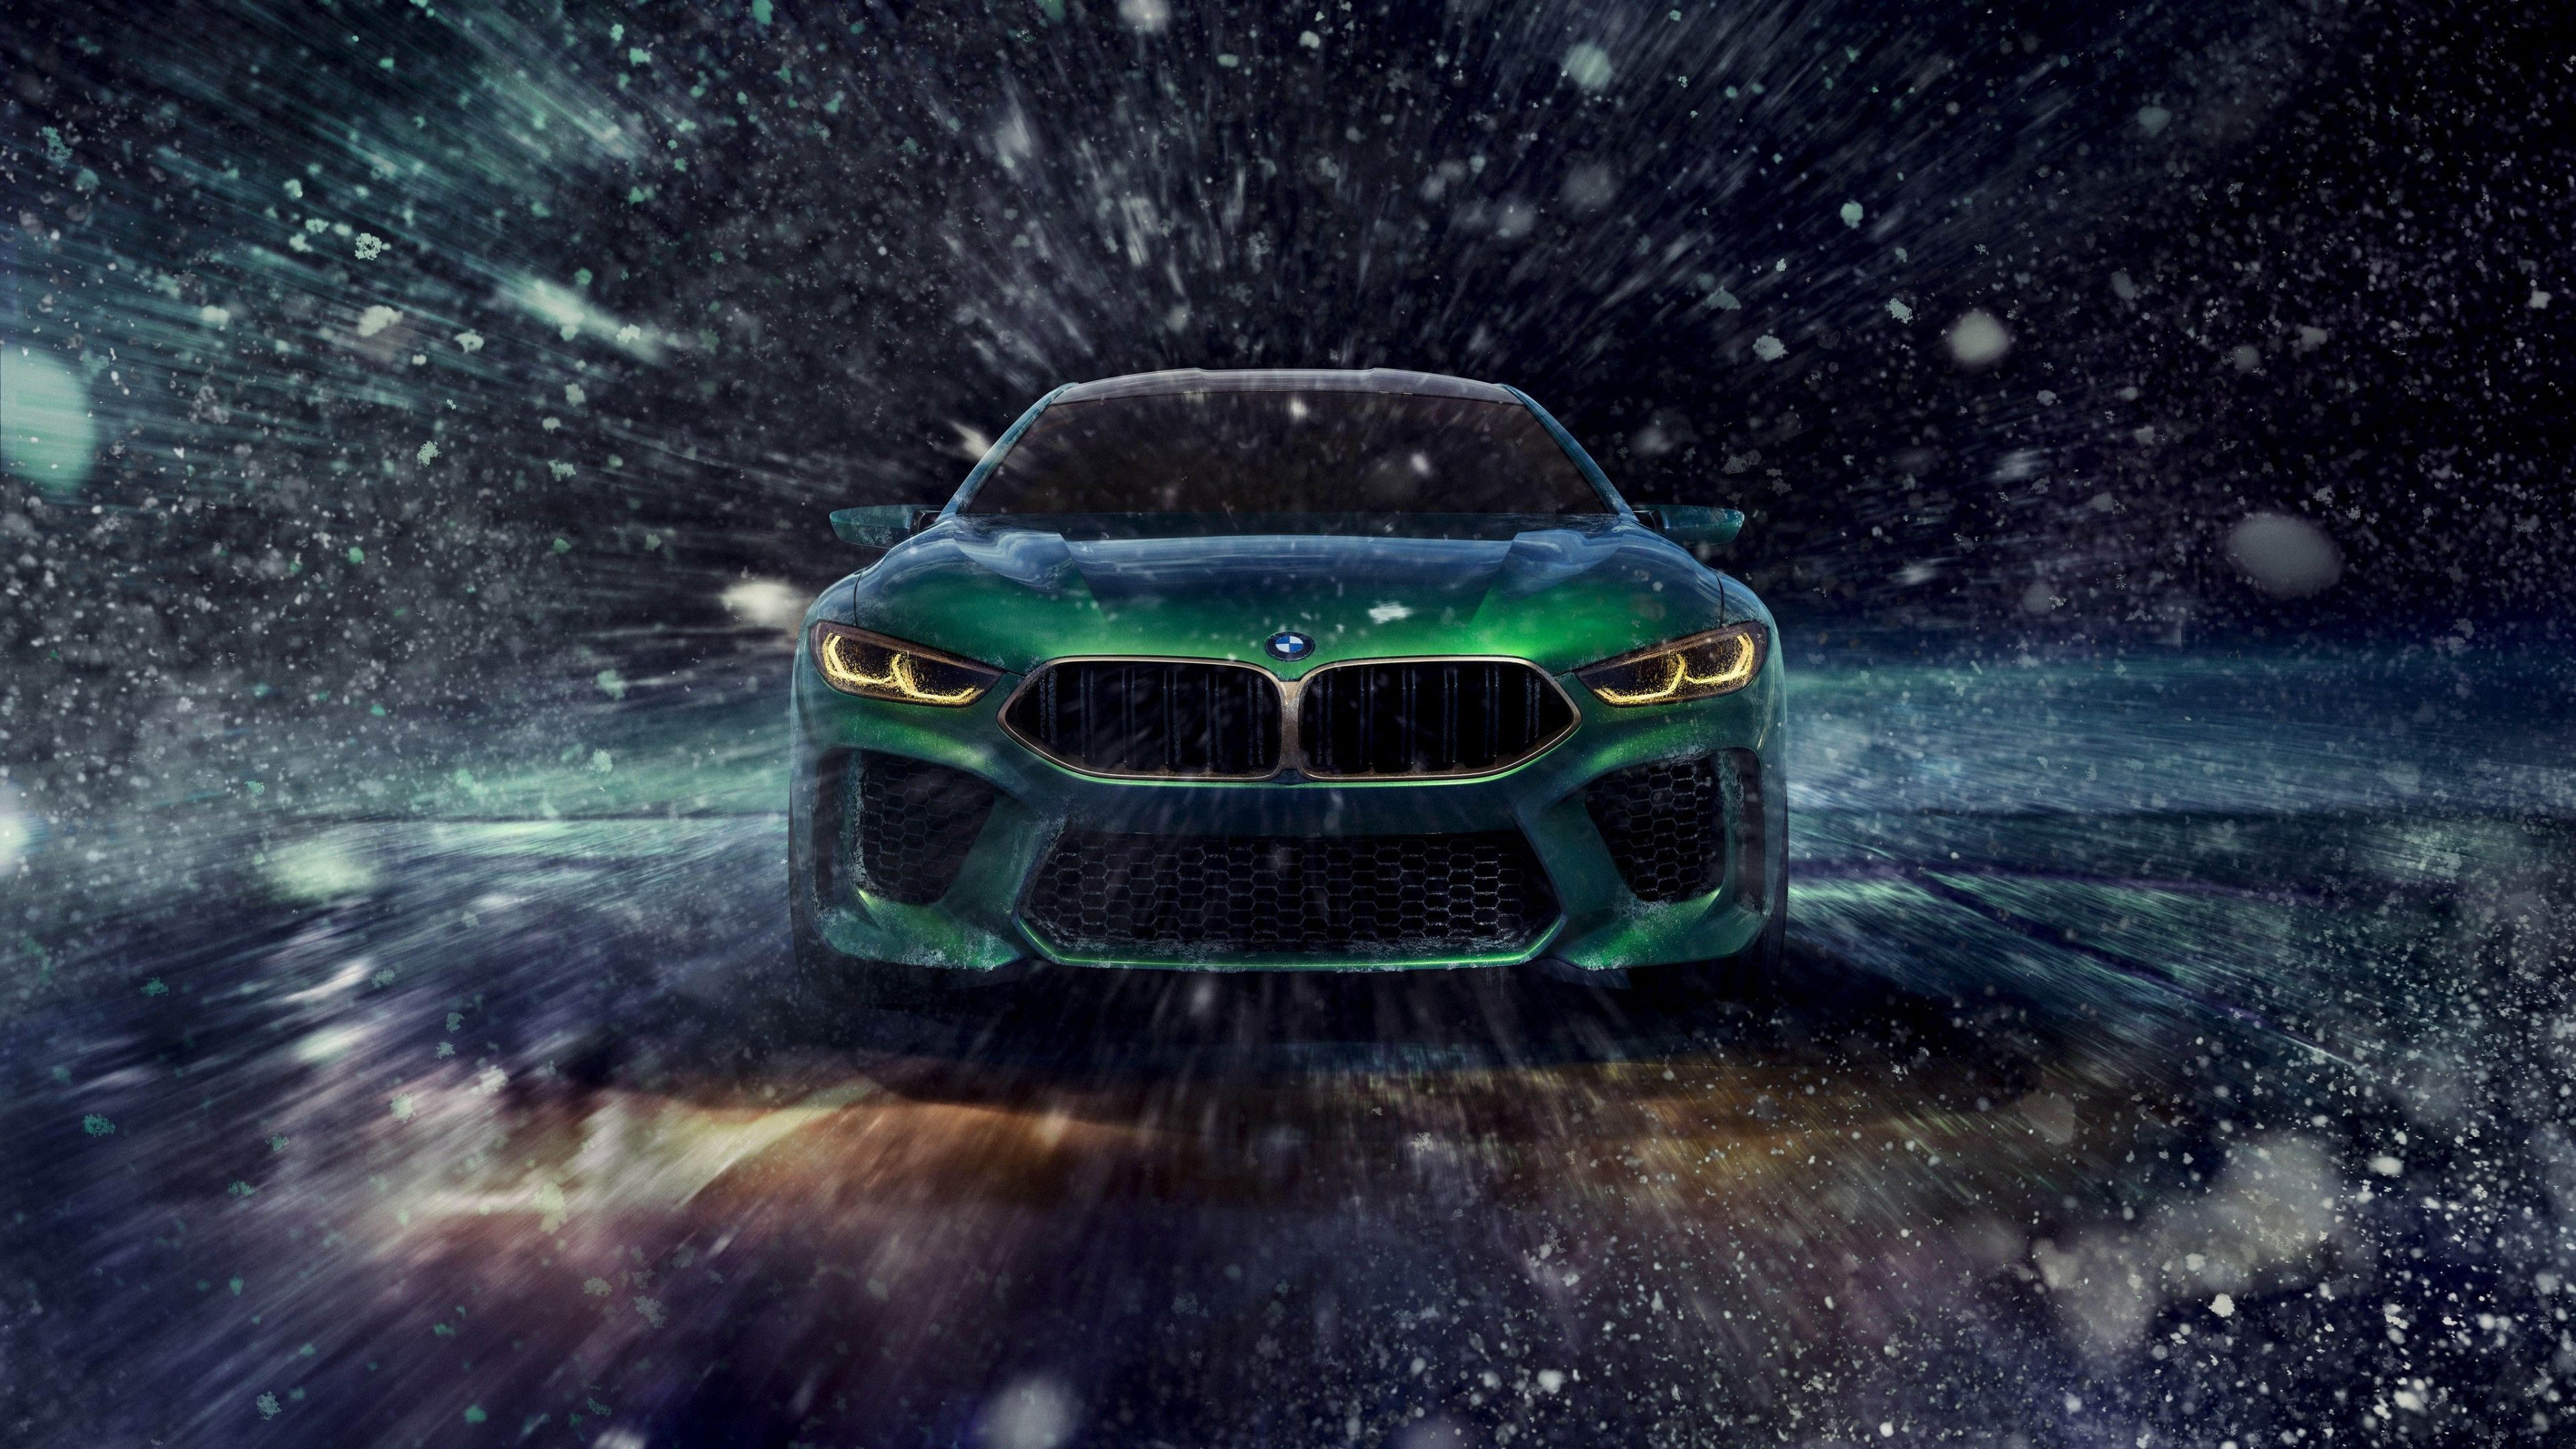 Download 3840x2160 Bmw M8 Gran Coupe, Concept Design, Green, Cars